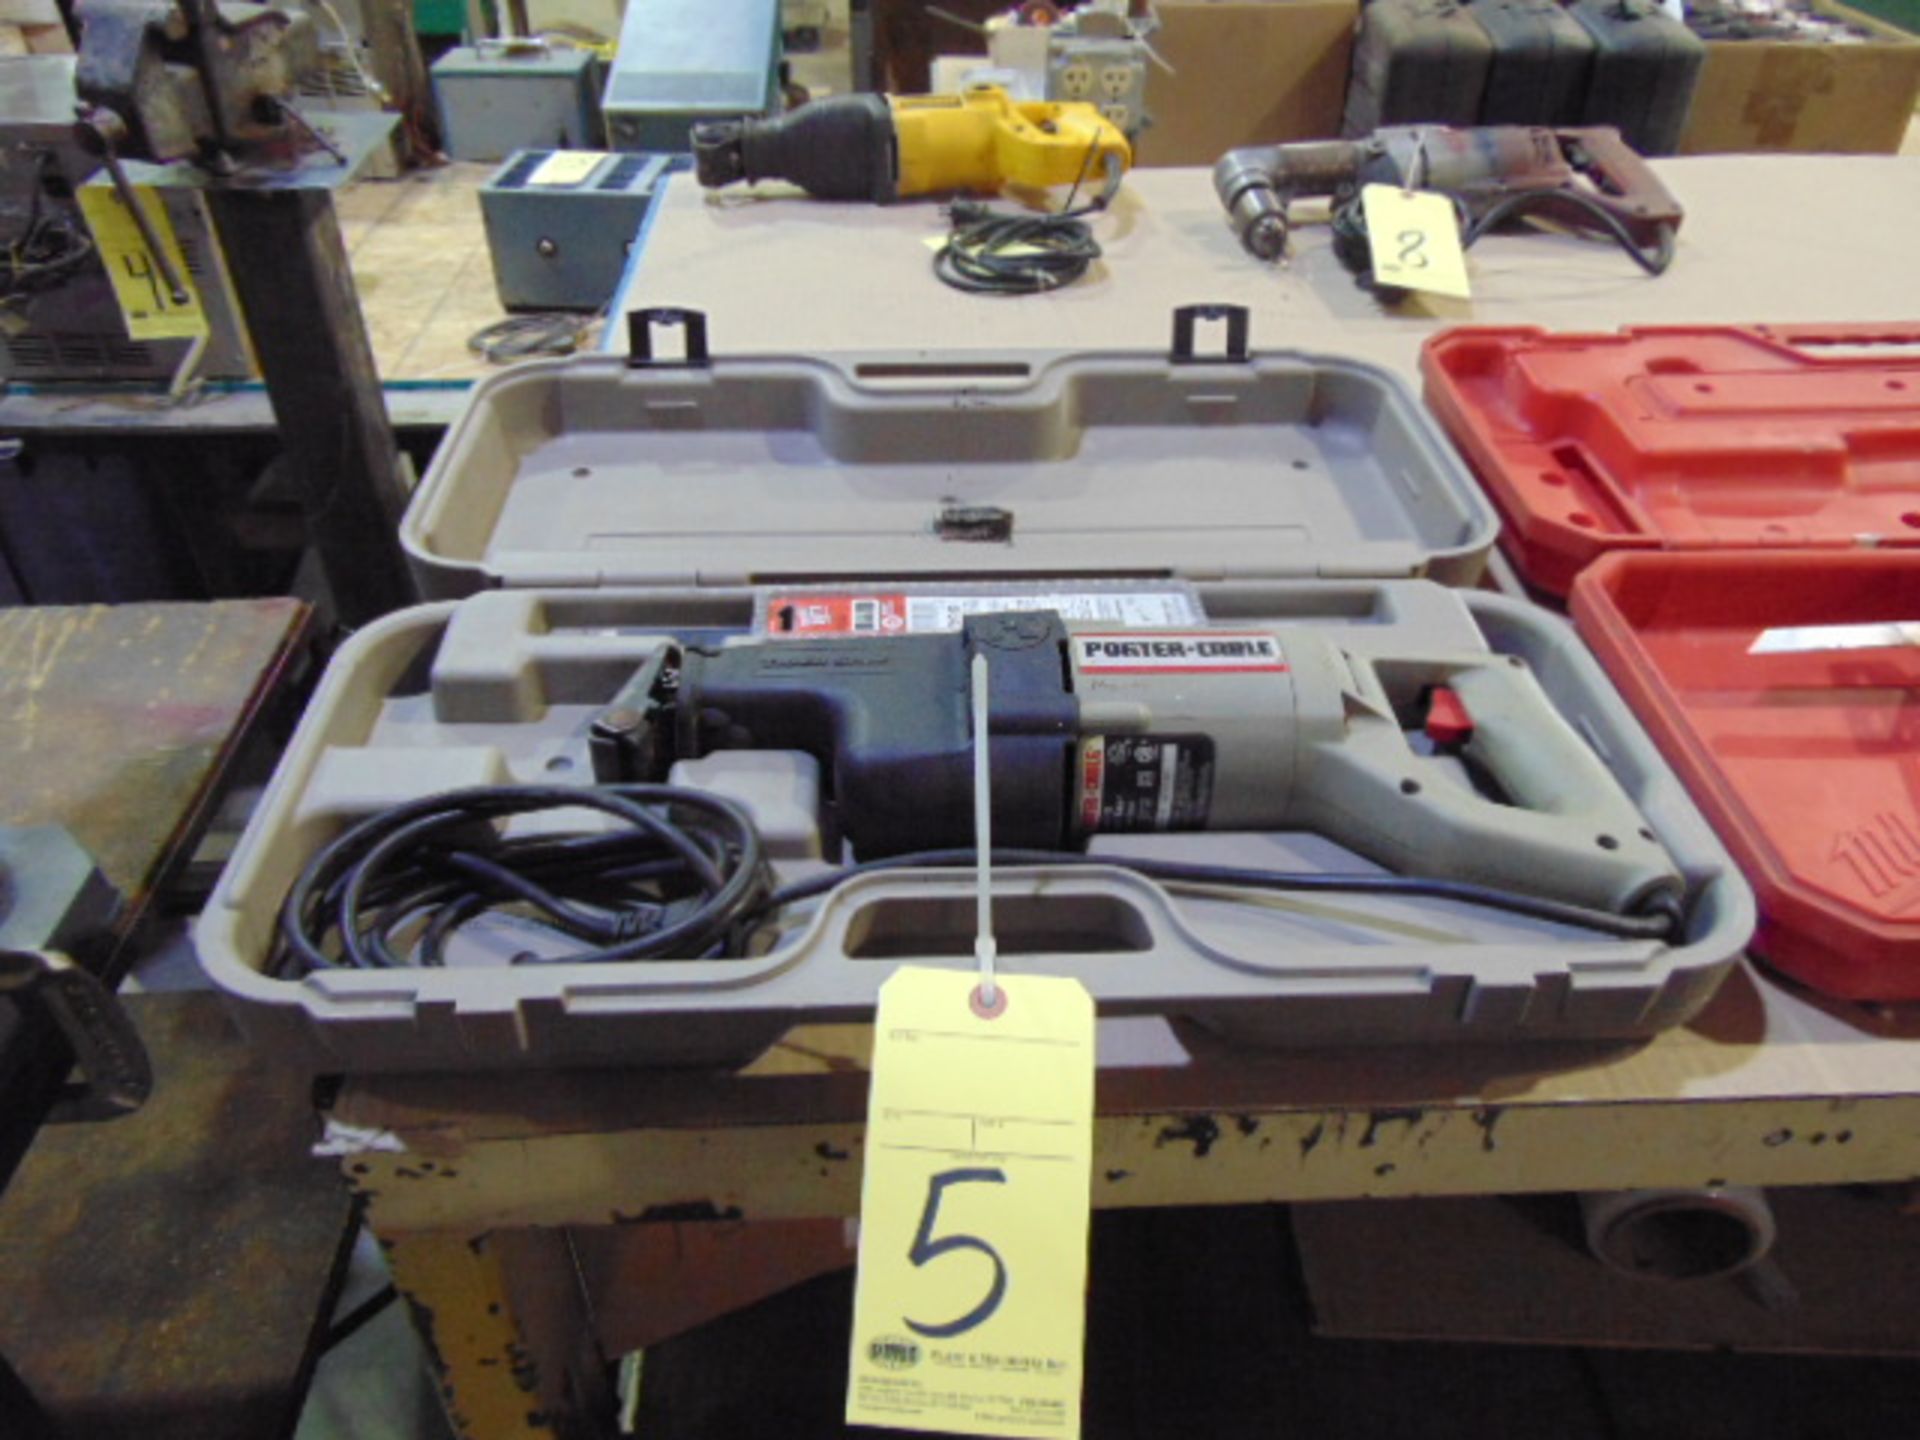 RECIPROCATING SAW, PORTER CABLE TIGER SAW, variable spd.